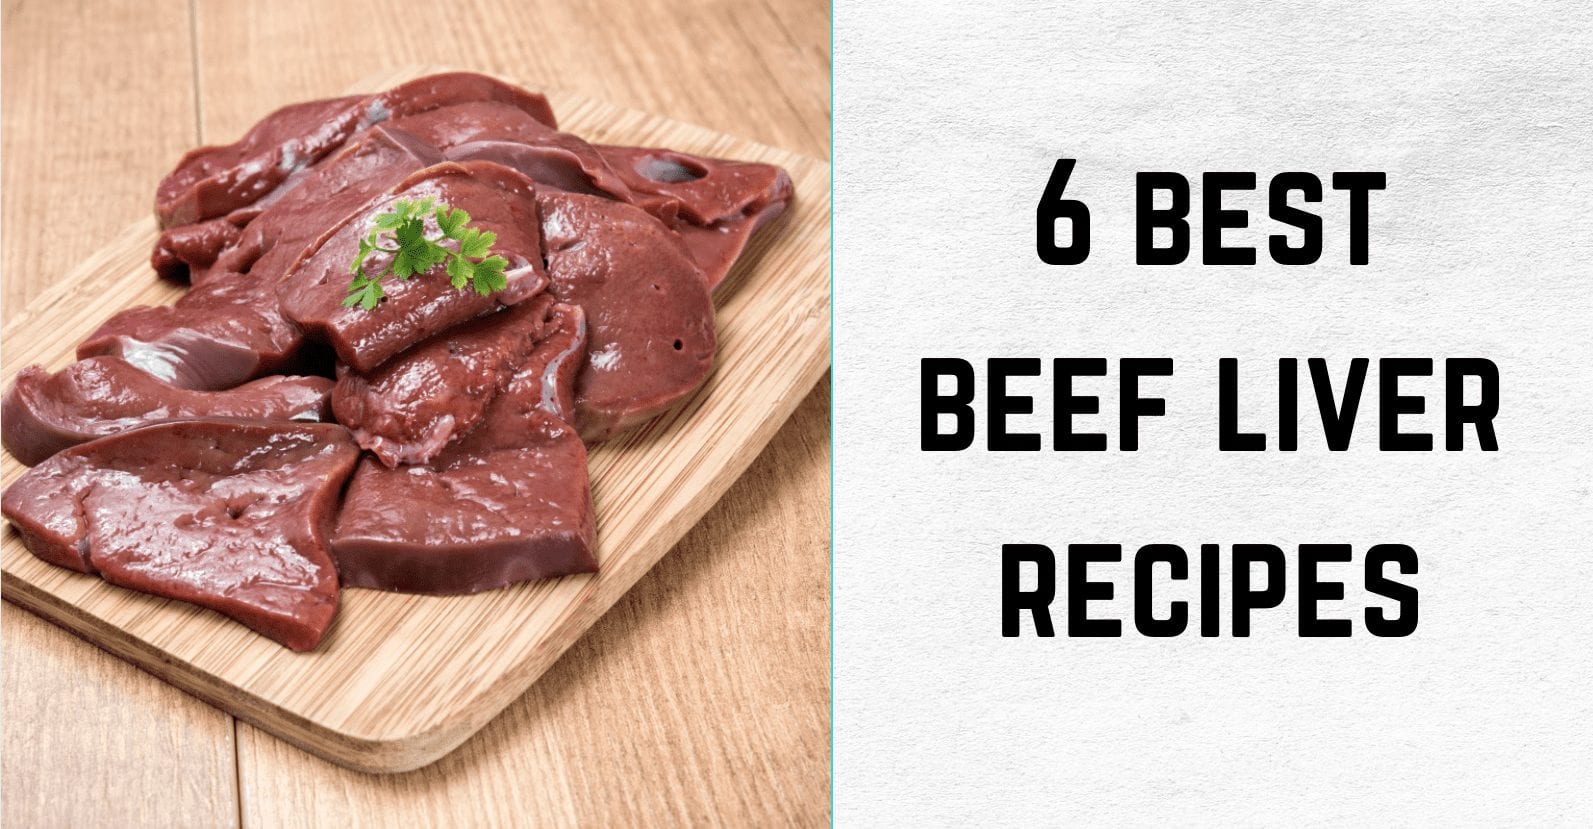 The 20 Best Carnivore & Keto Beef Liver Recipes